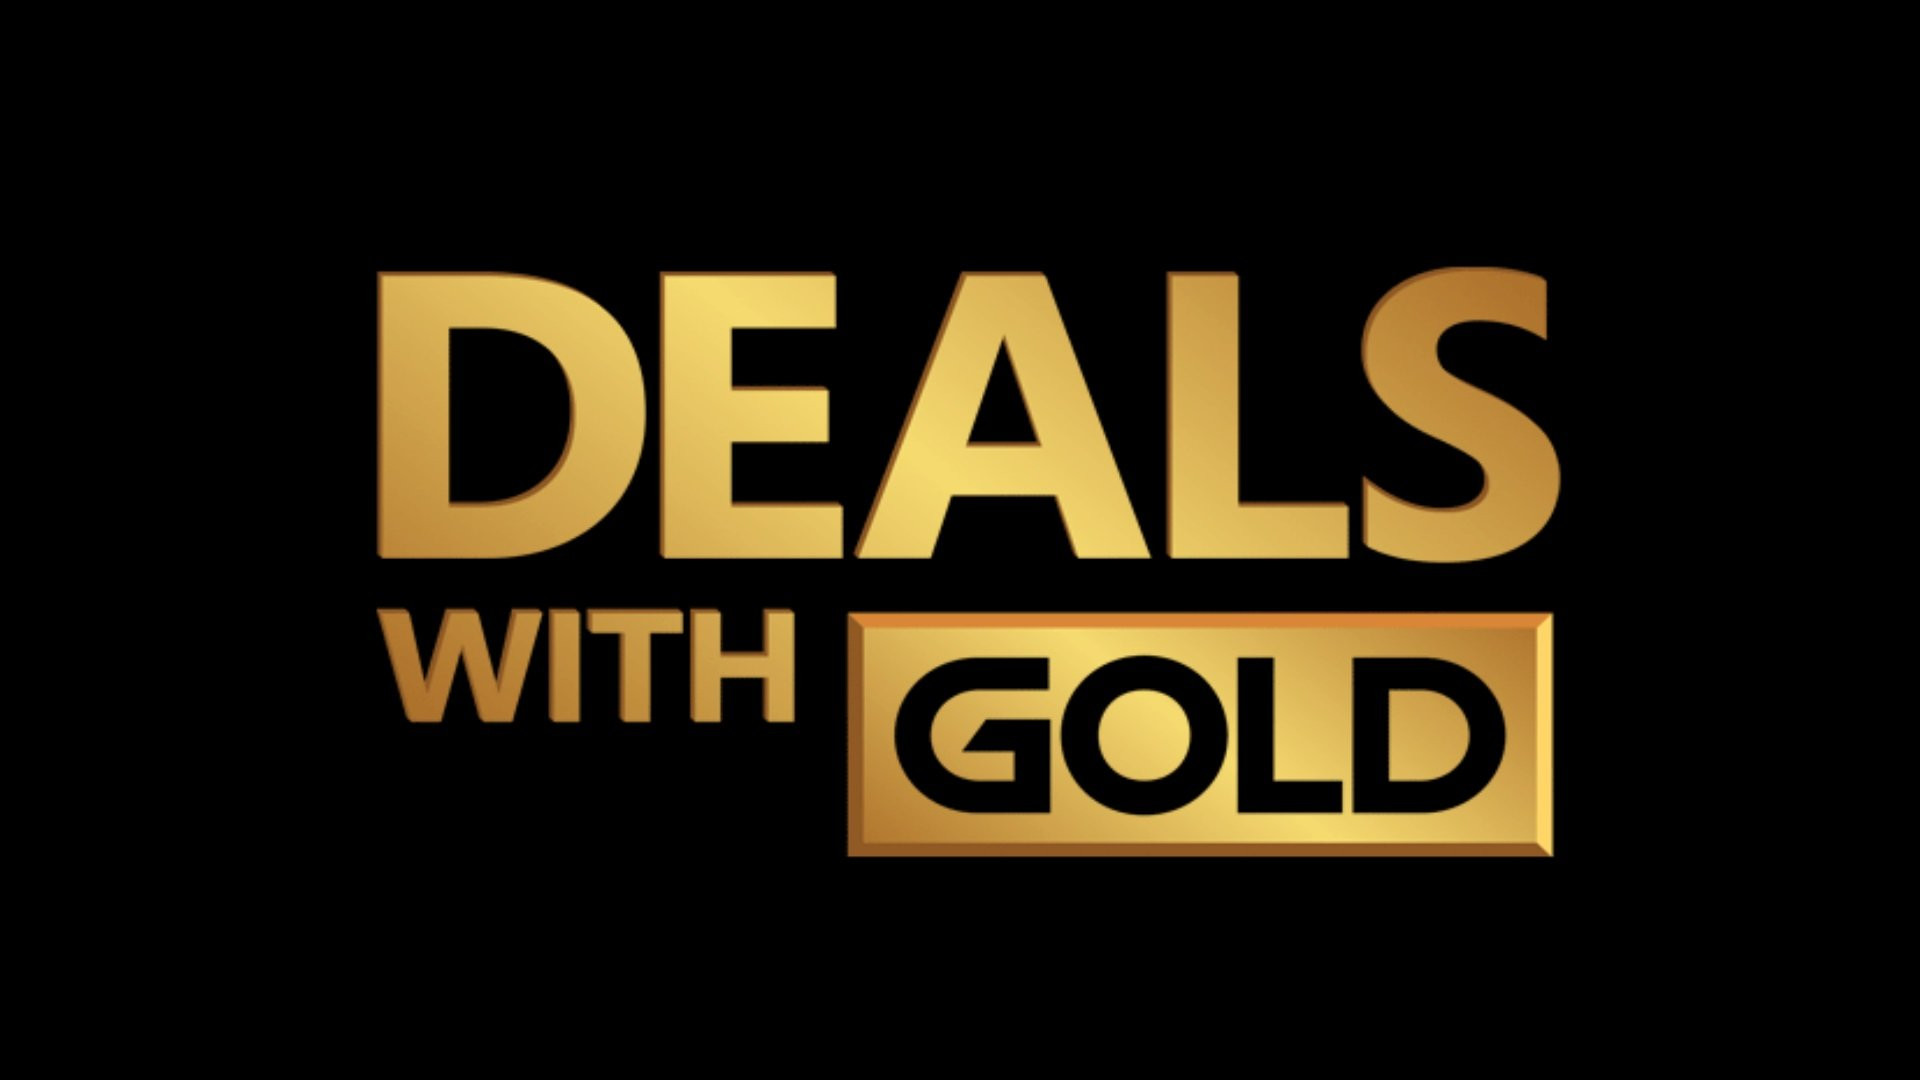 Deals with Gold semaine 11